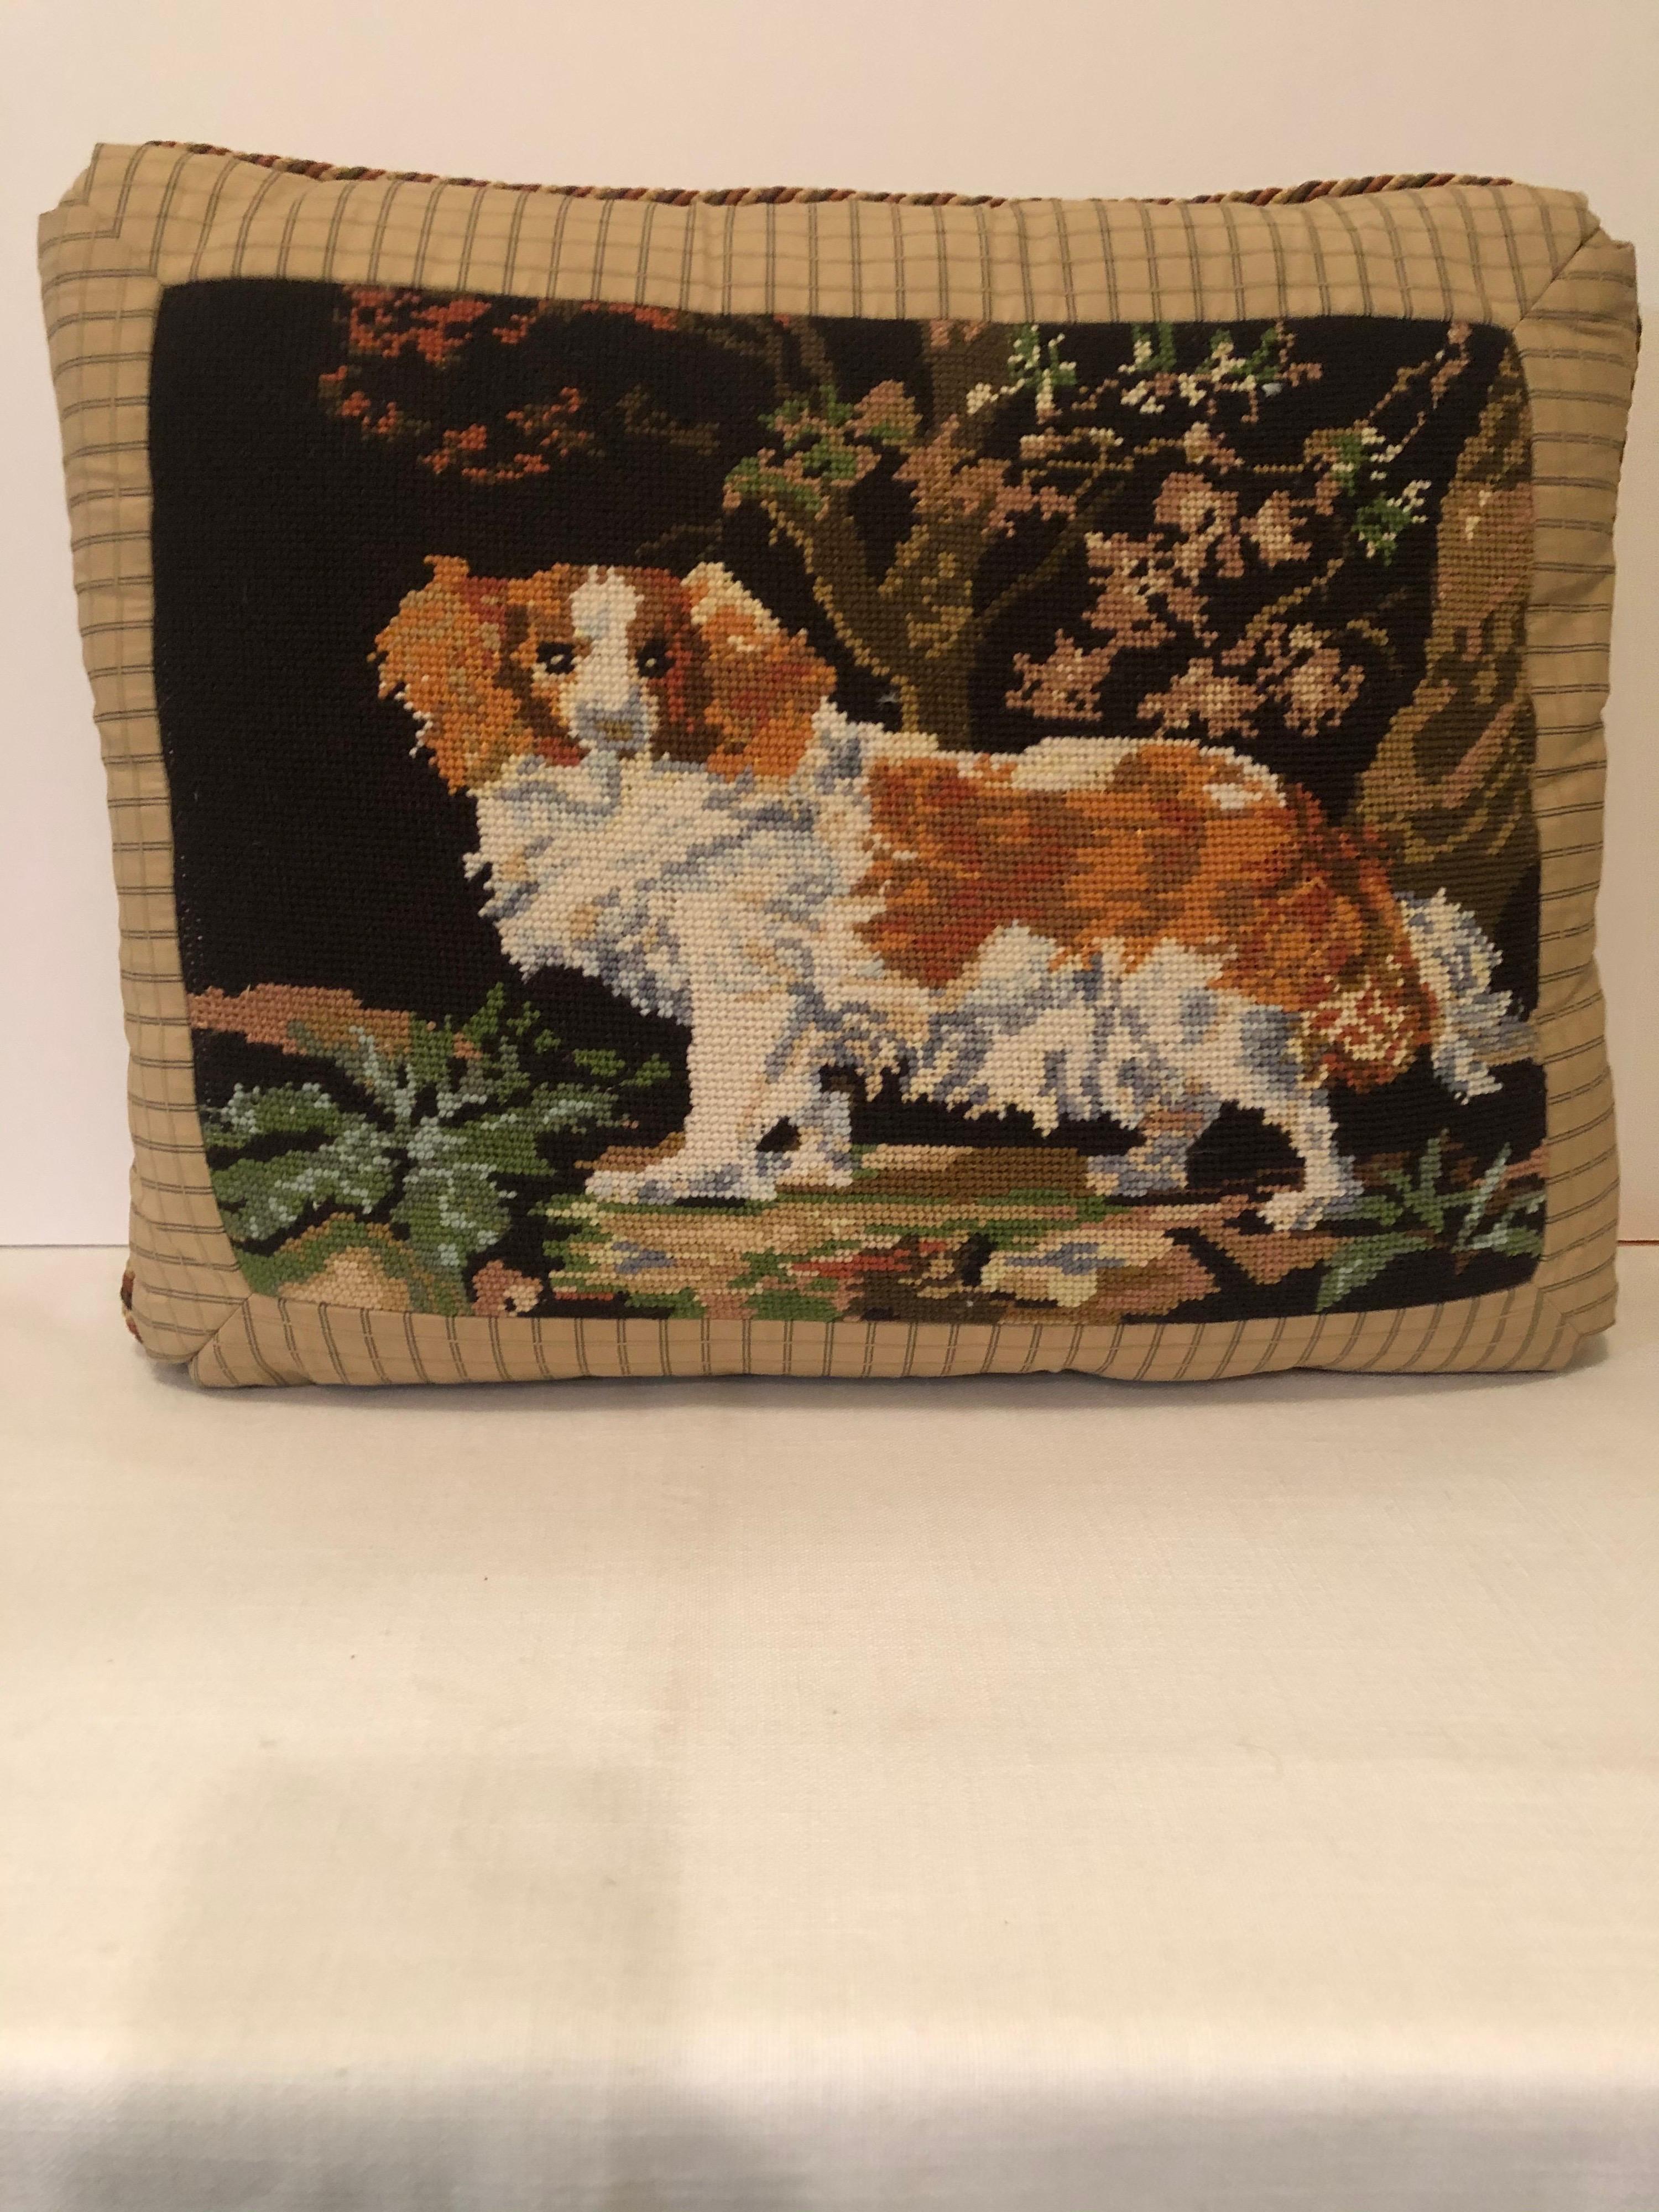 American Needlepoint Pillow with King Charles Spaniel Playing in the Woods